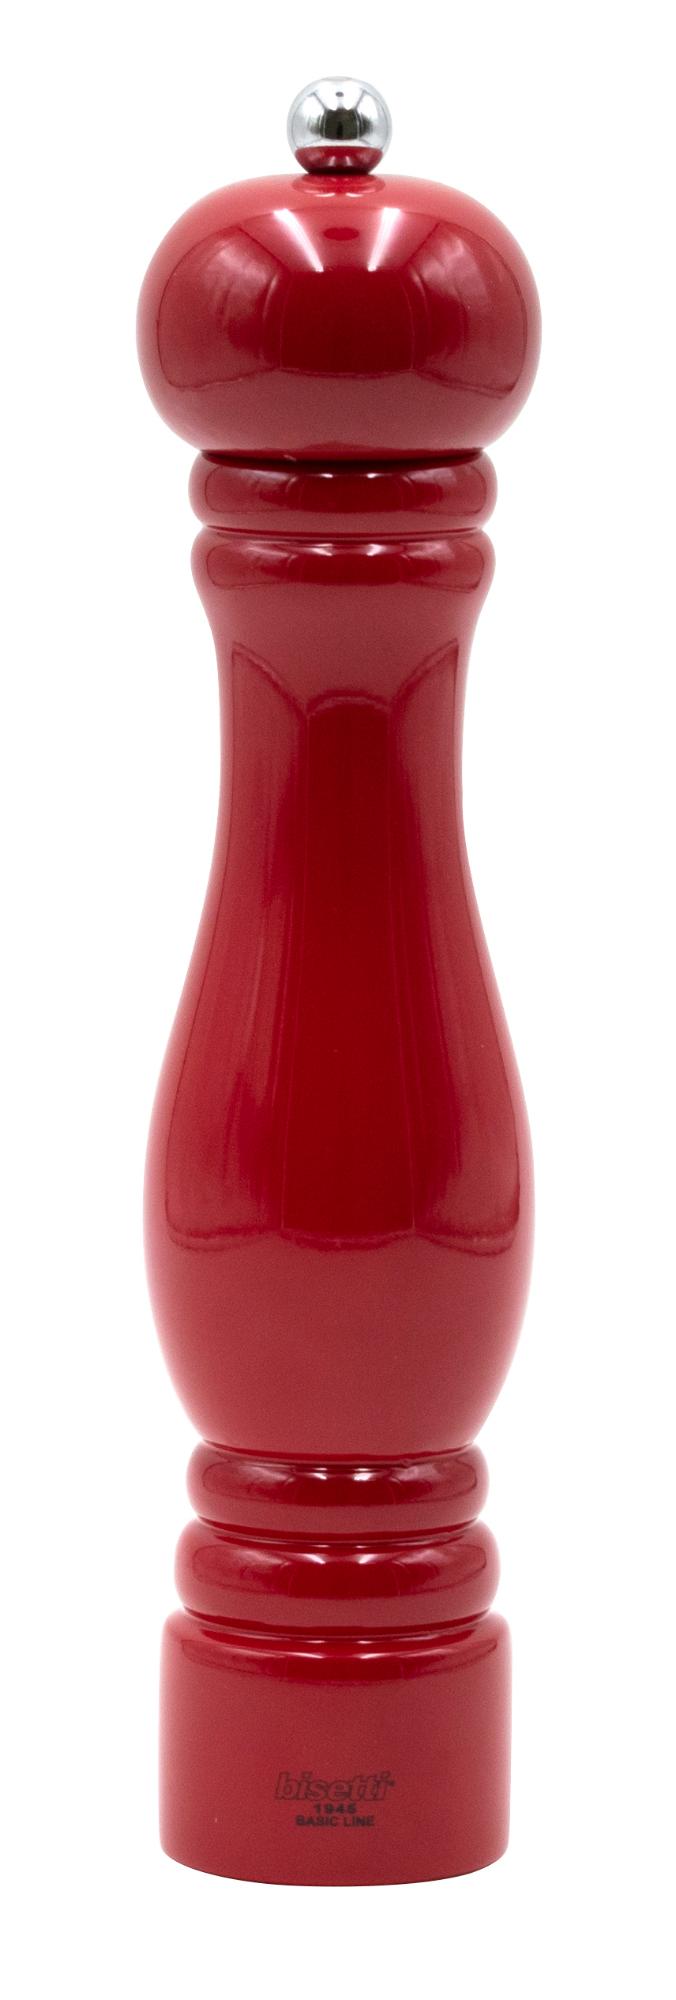 Sorrento pepper mill, red, 250mm